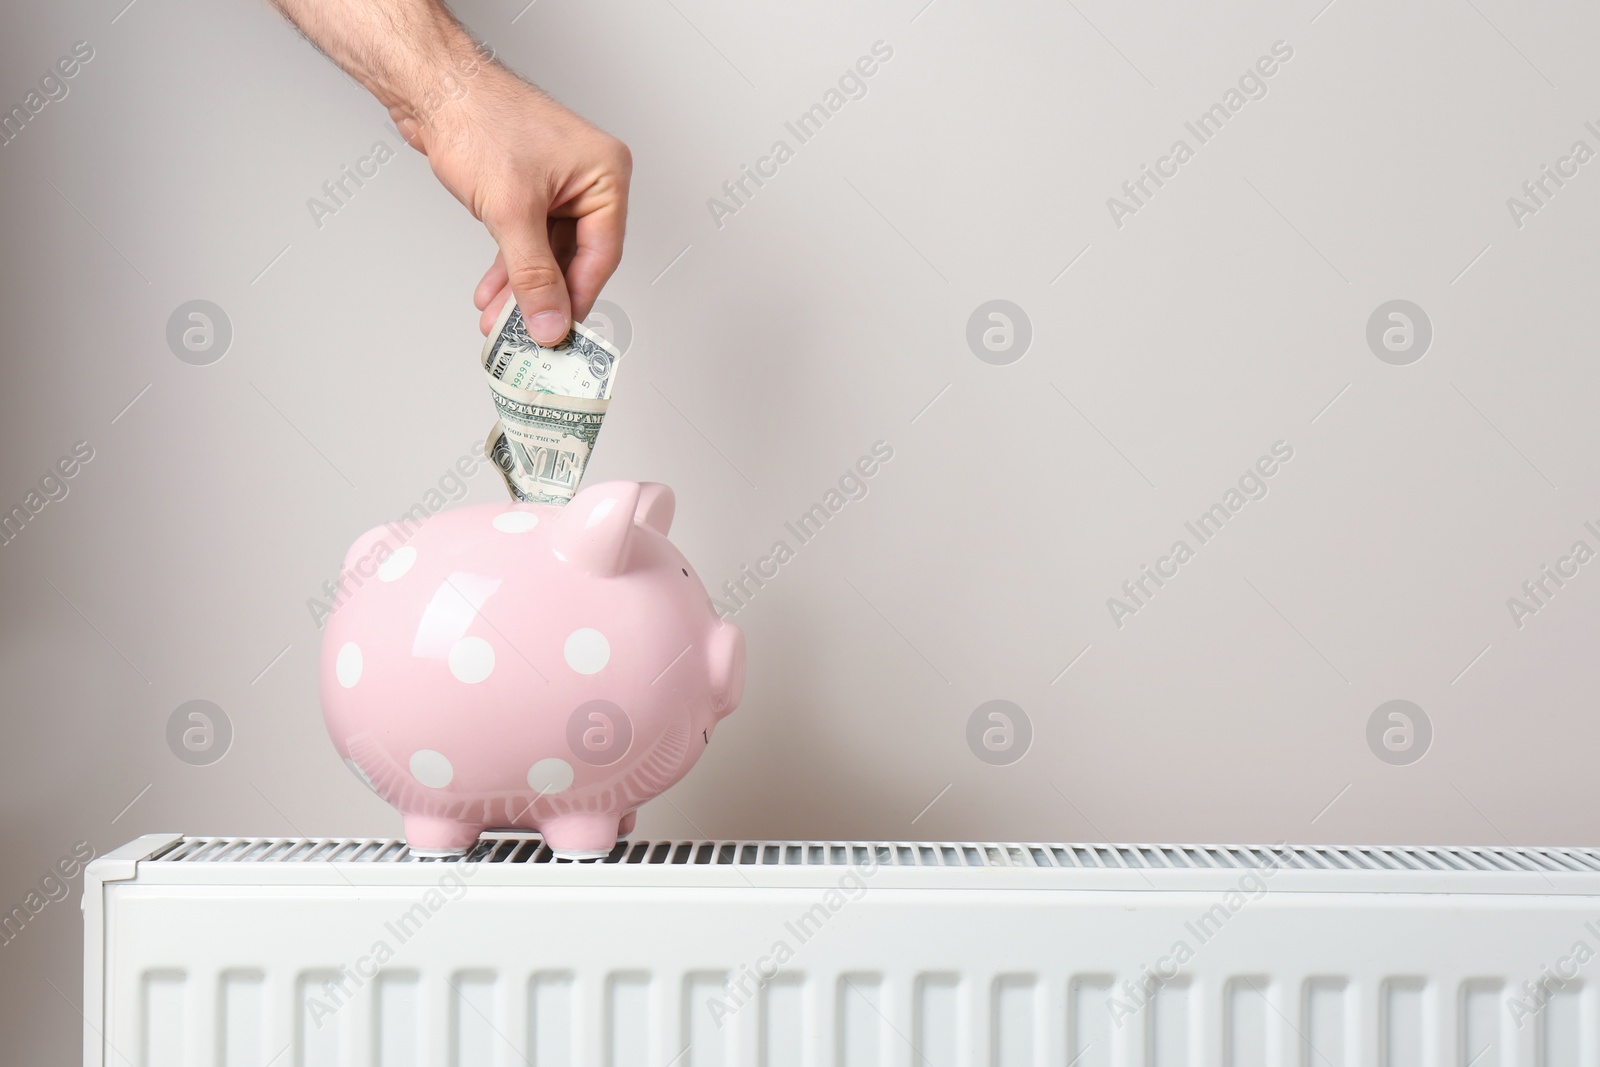 Photo of Man inserting money into piggy bank on heating radiator against color background. Space for text